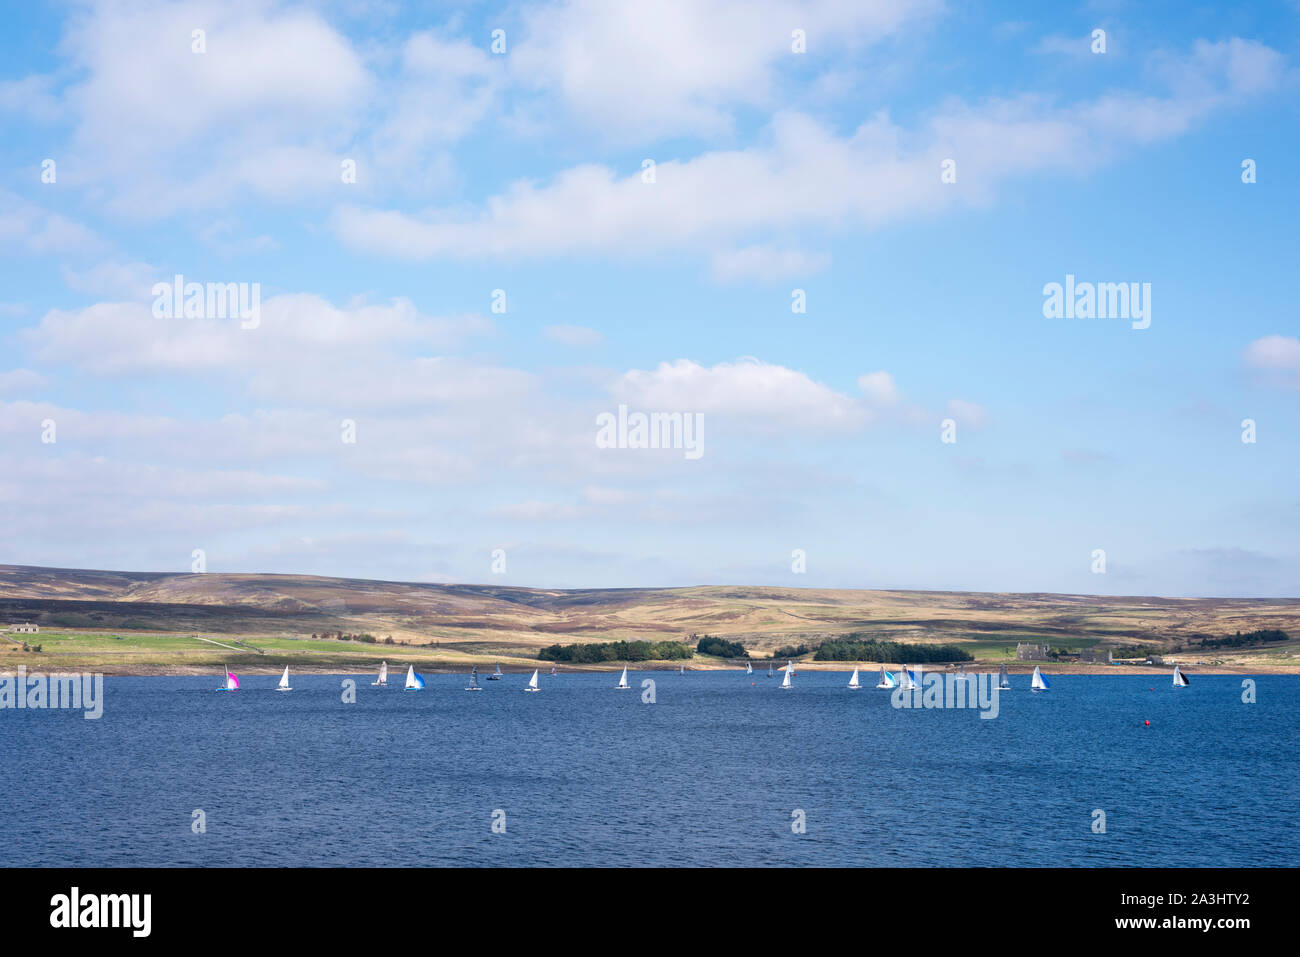 Sailing on Grimwith Reservoir, North Yorkshire. Stock Photo